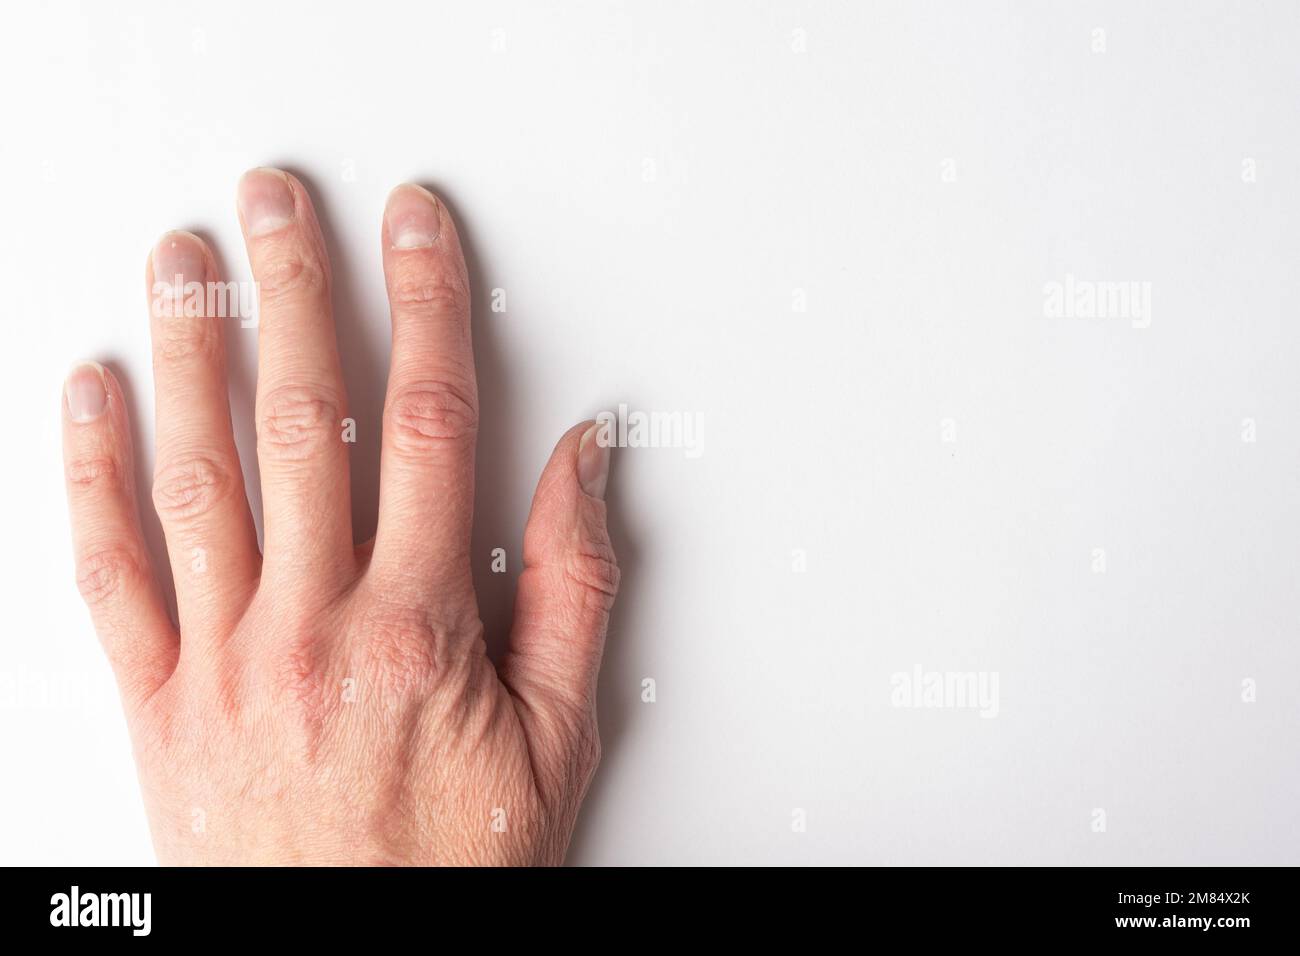 Close-up of a woman's age-old hand with wrinkles with natural nails, overgrown cuticle on a white background, top view, copy space. A hand with age-re Stock Photo